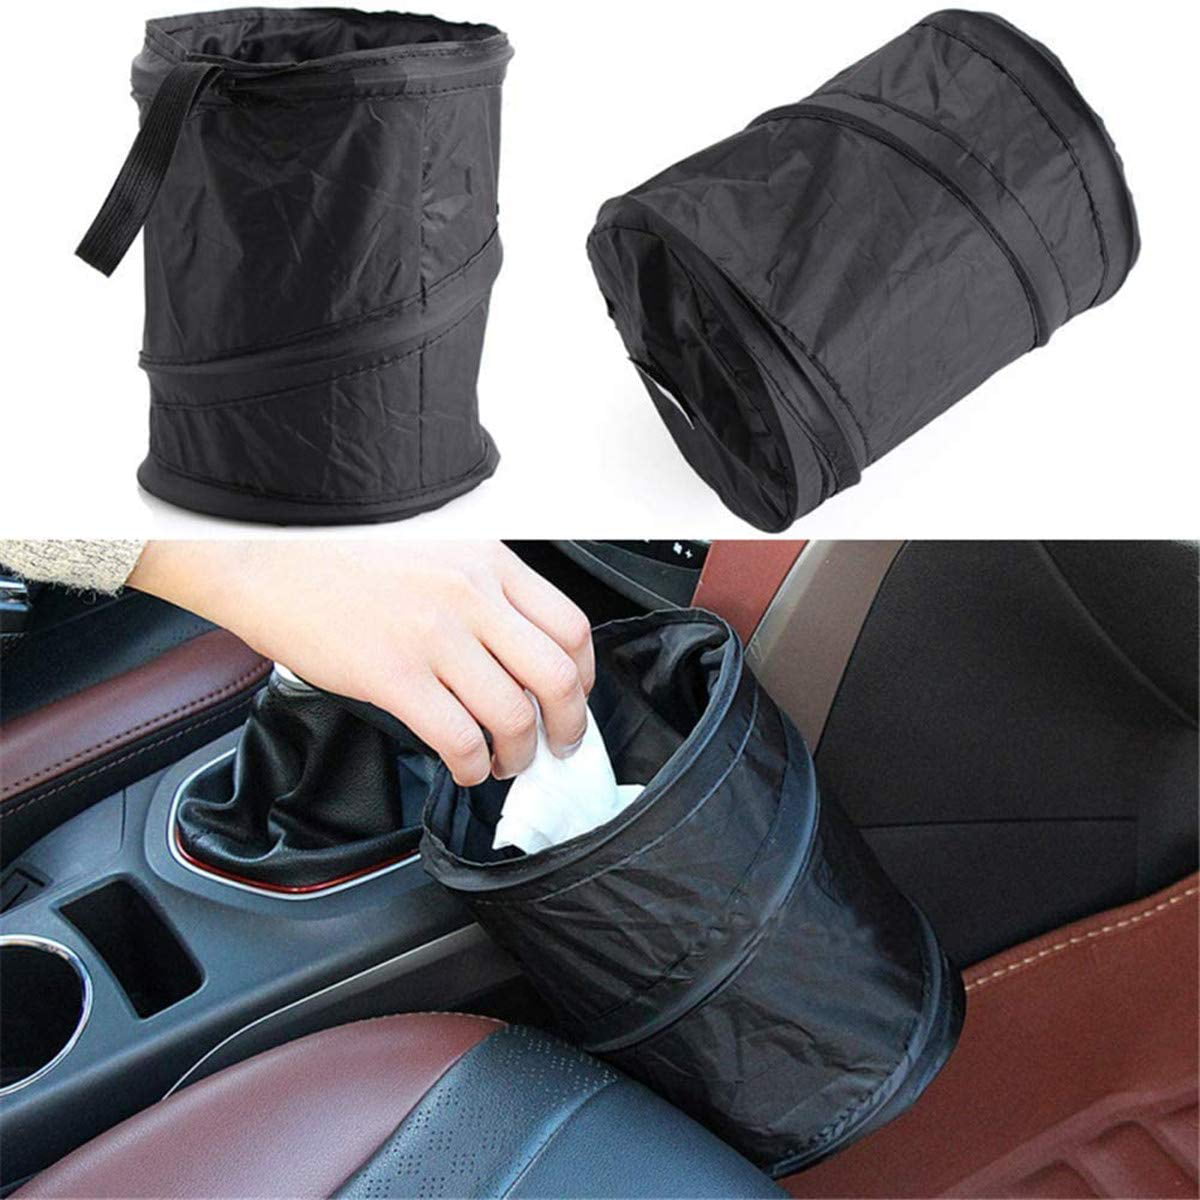 Home and Car Storage Bags Foldable and Washable Car Seat Back Waste Container Detachable Garbage Bag for Traveling Heatoe 3 Pack Black Car Trash Bags Hanging Garbage Bag